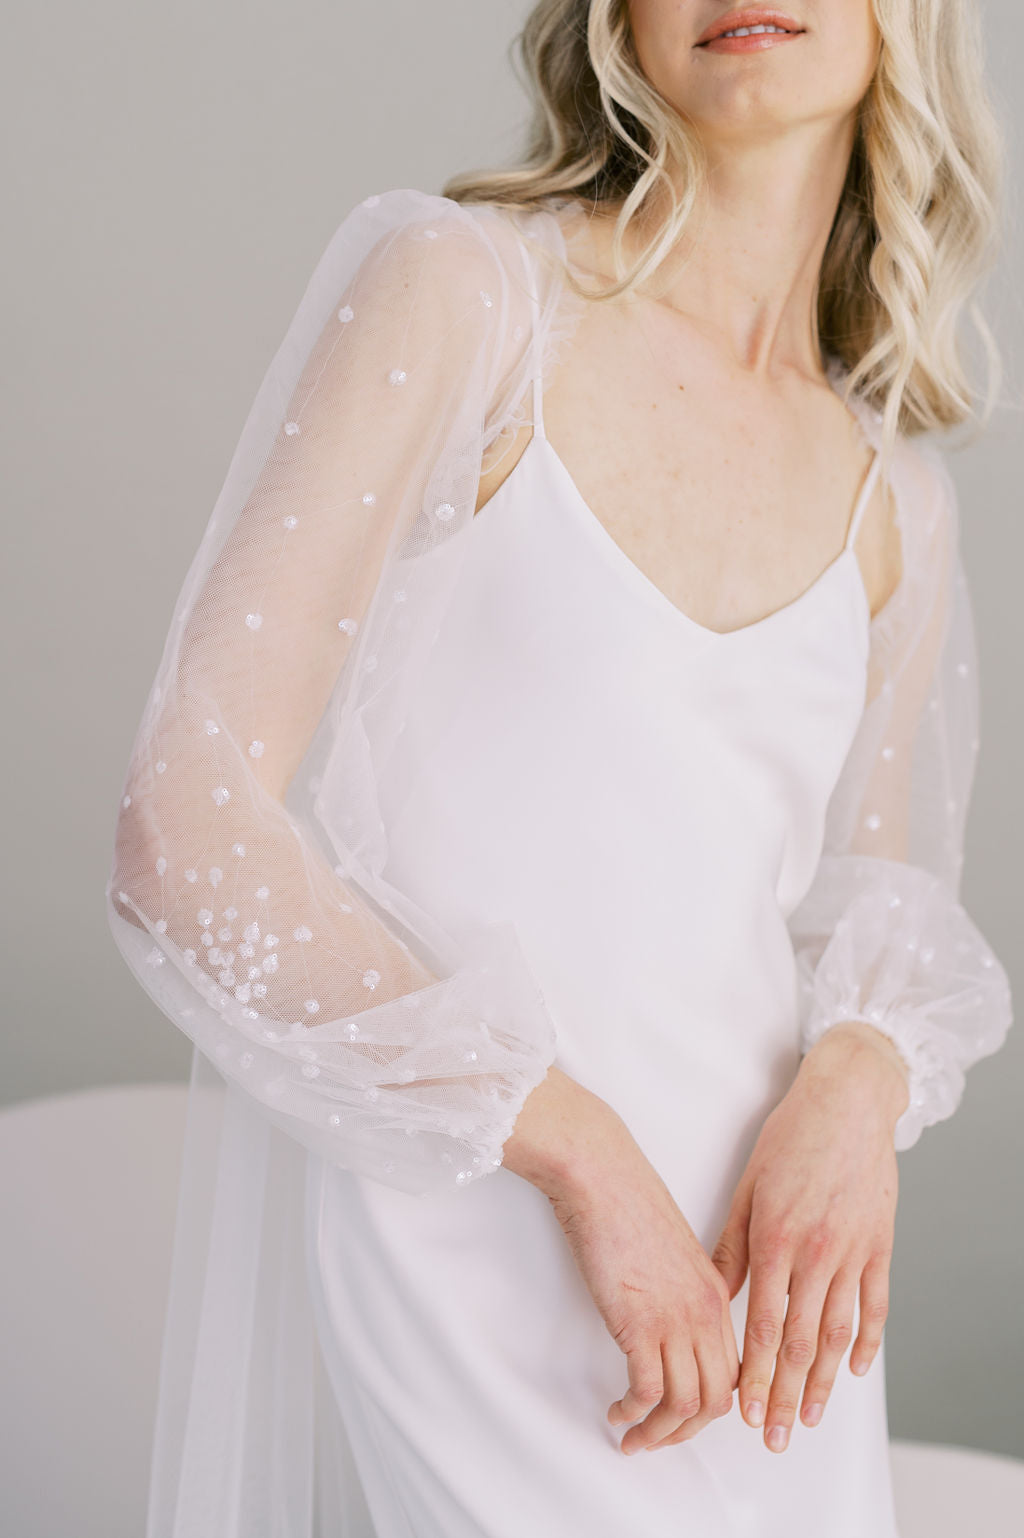 Long sequin bridal cape. Long poet sleeves. Handmade by Catherine Langlois, Toronto.